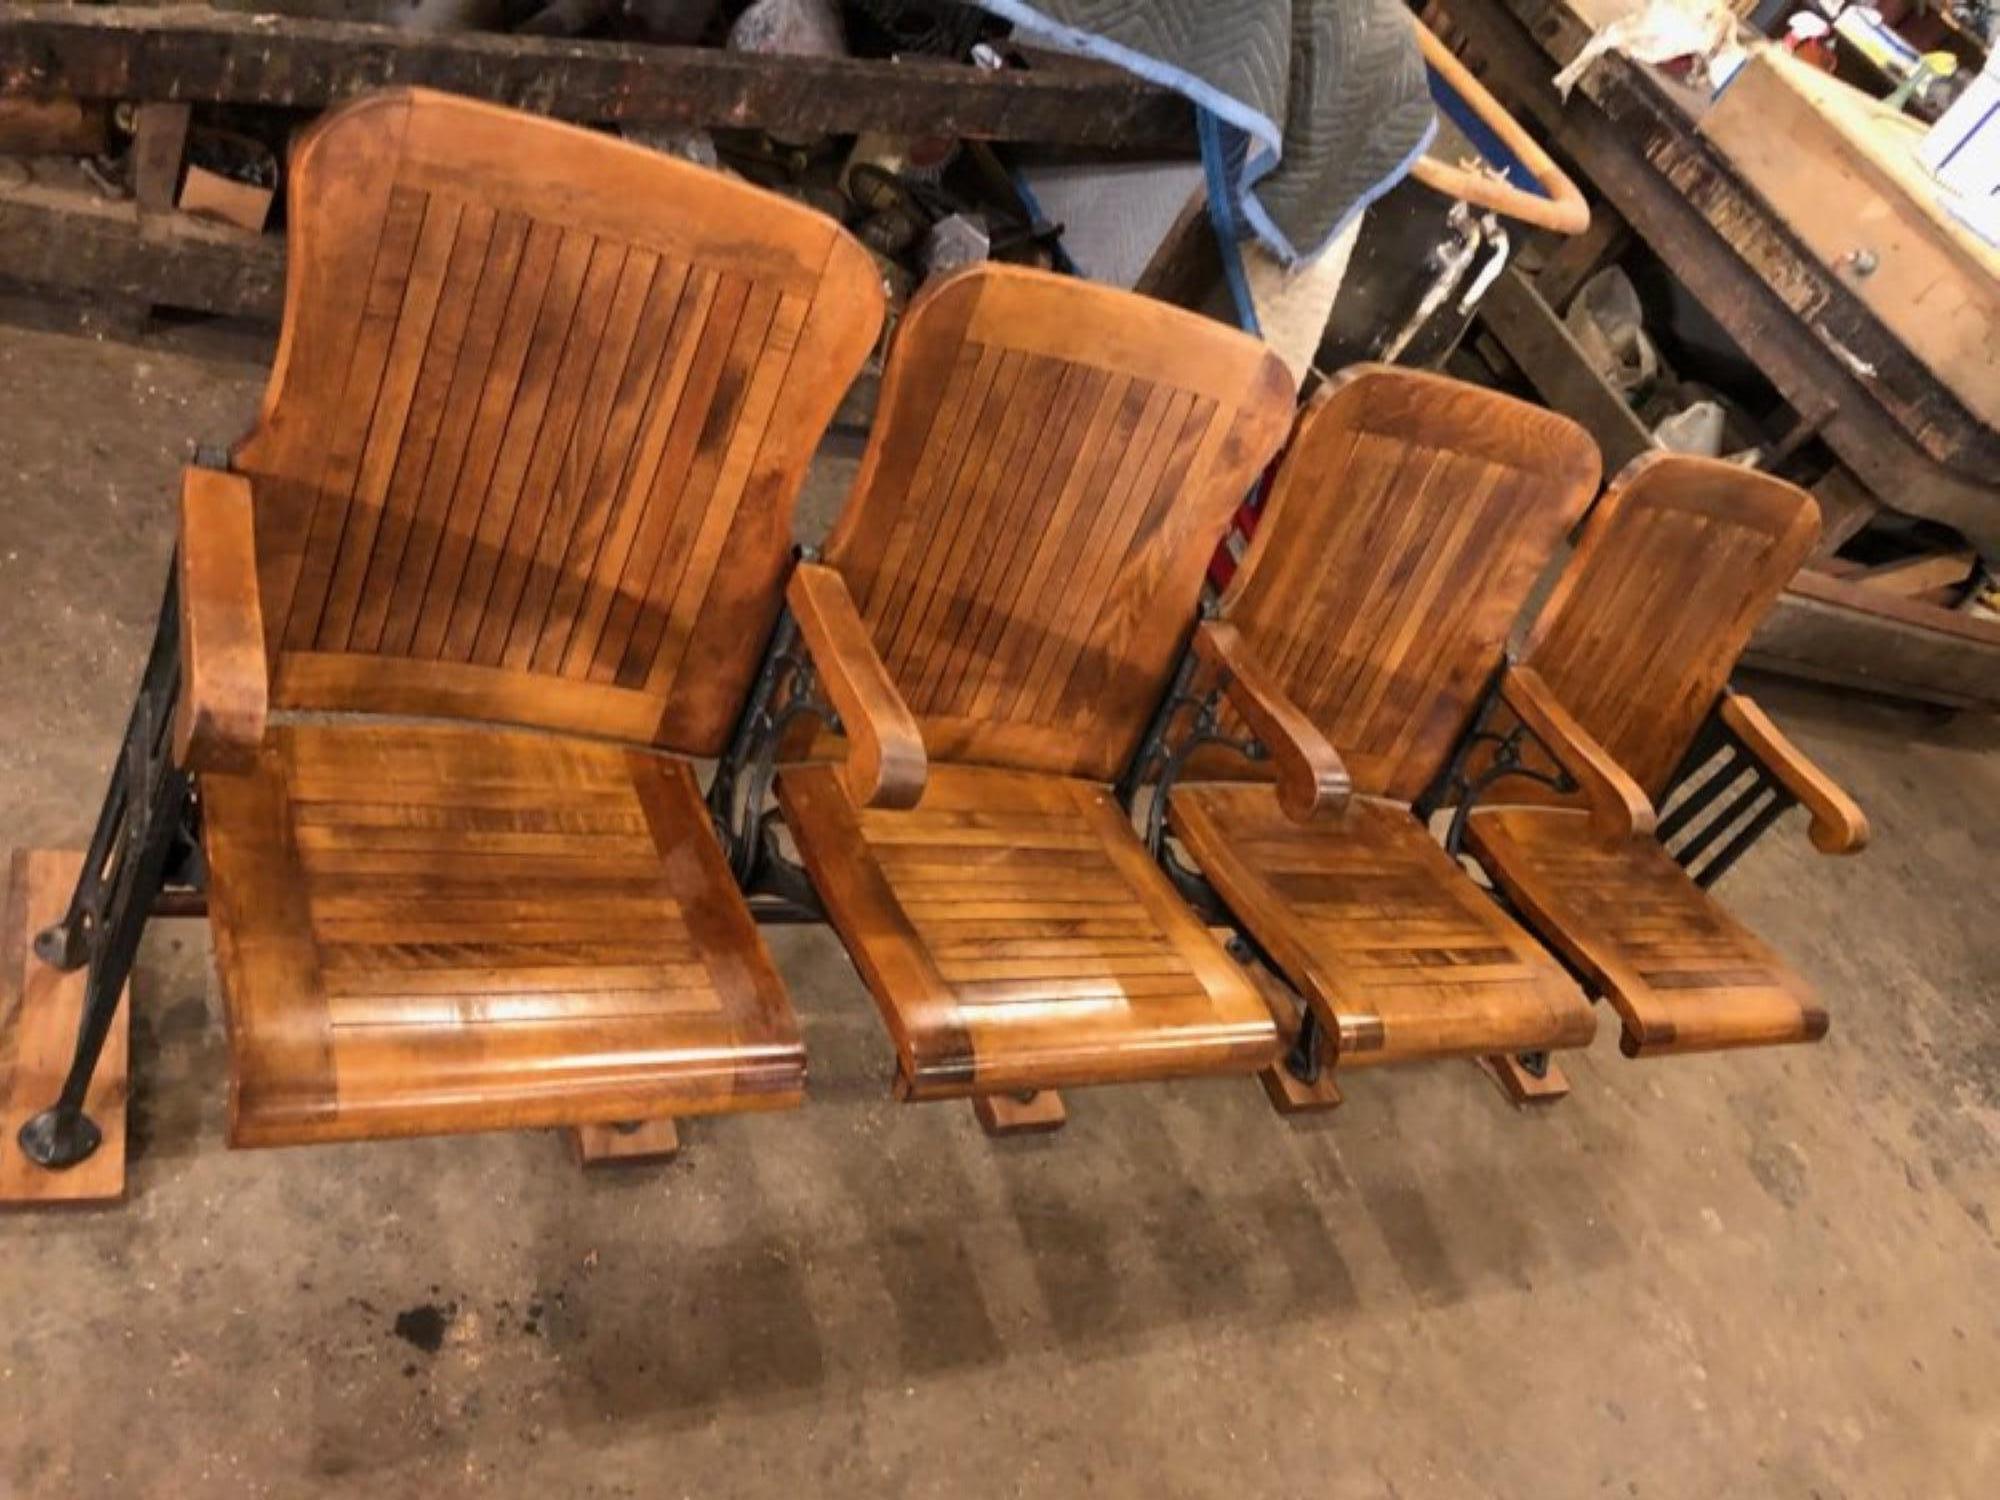 1905 Four Seat Folding Theater Chairs with Cast Iron Frame from Brooklyn 4